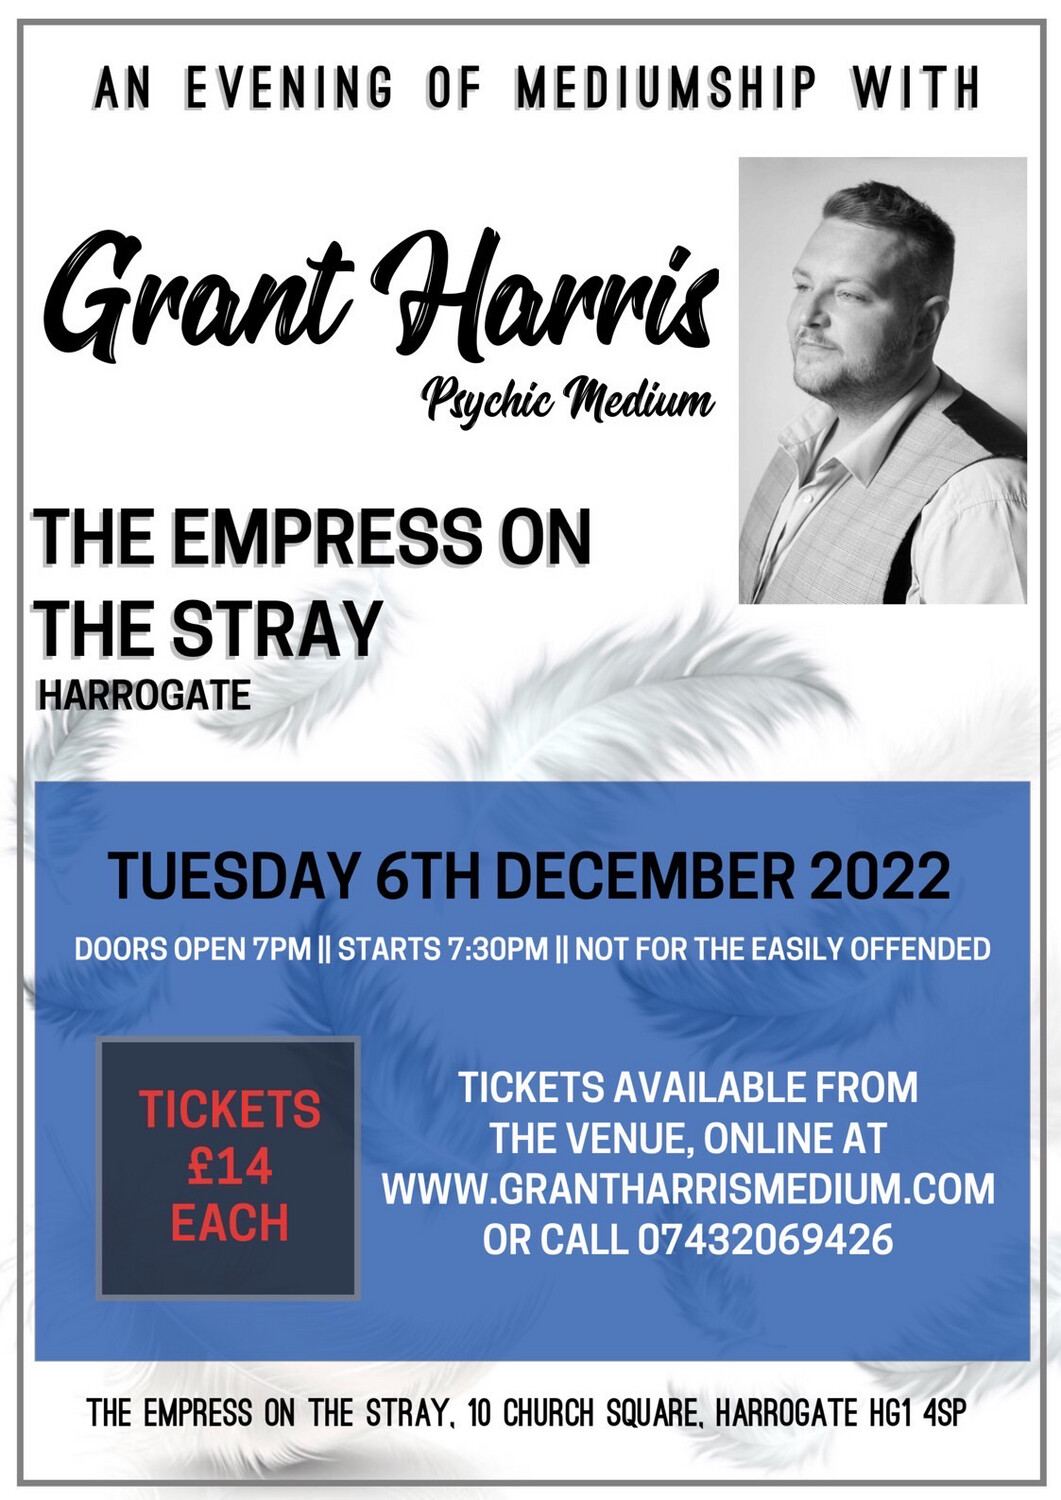 The Empress on the Stray, Harrogate, Tue 6th December 2022